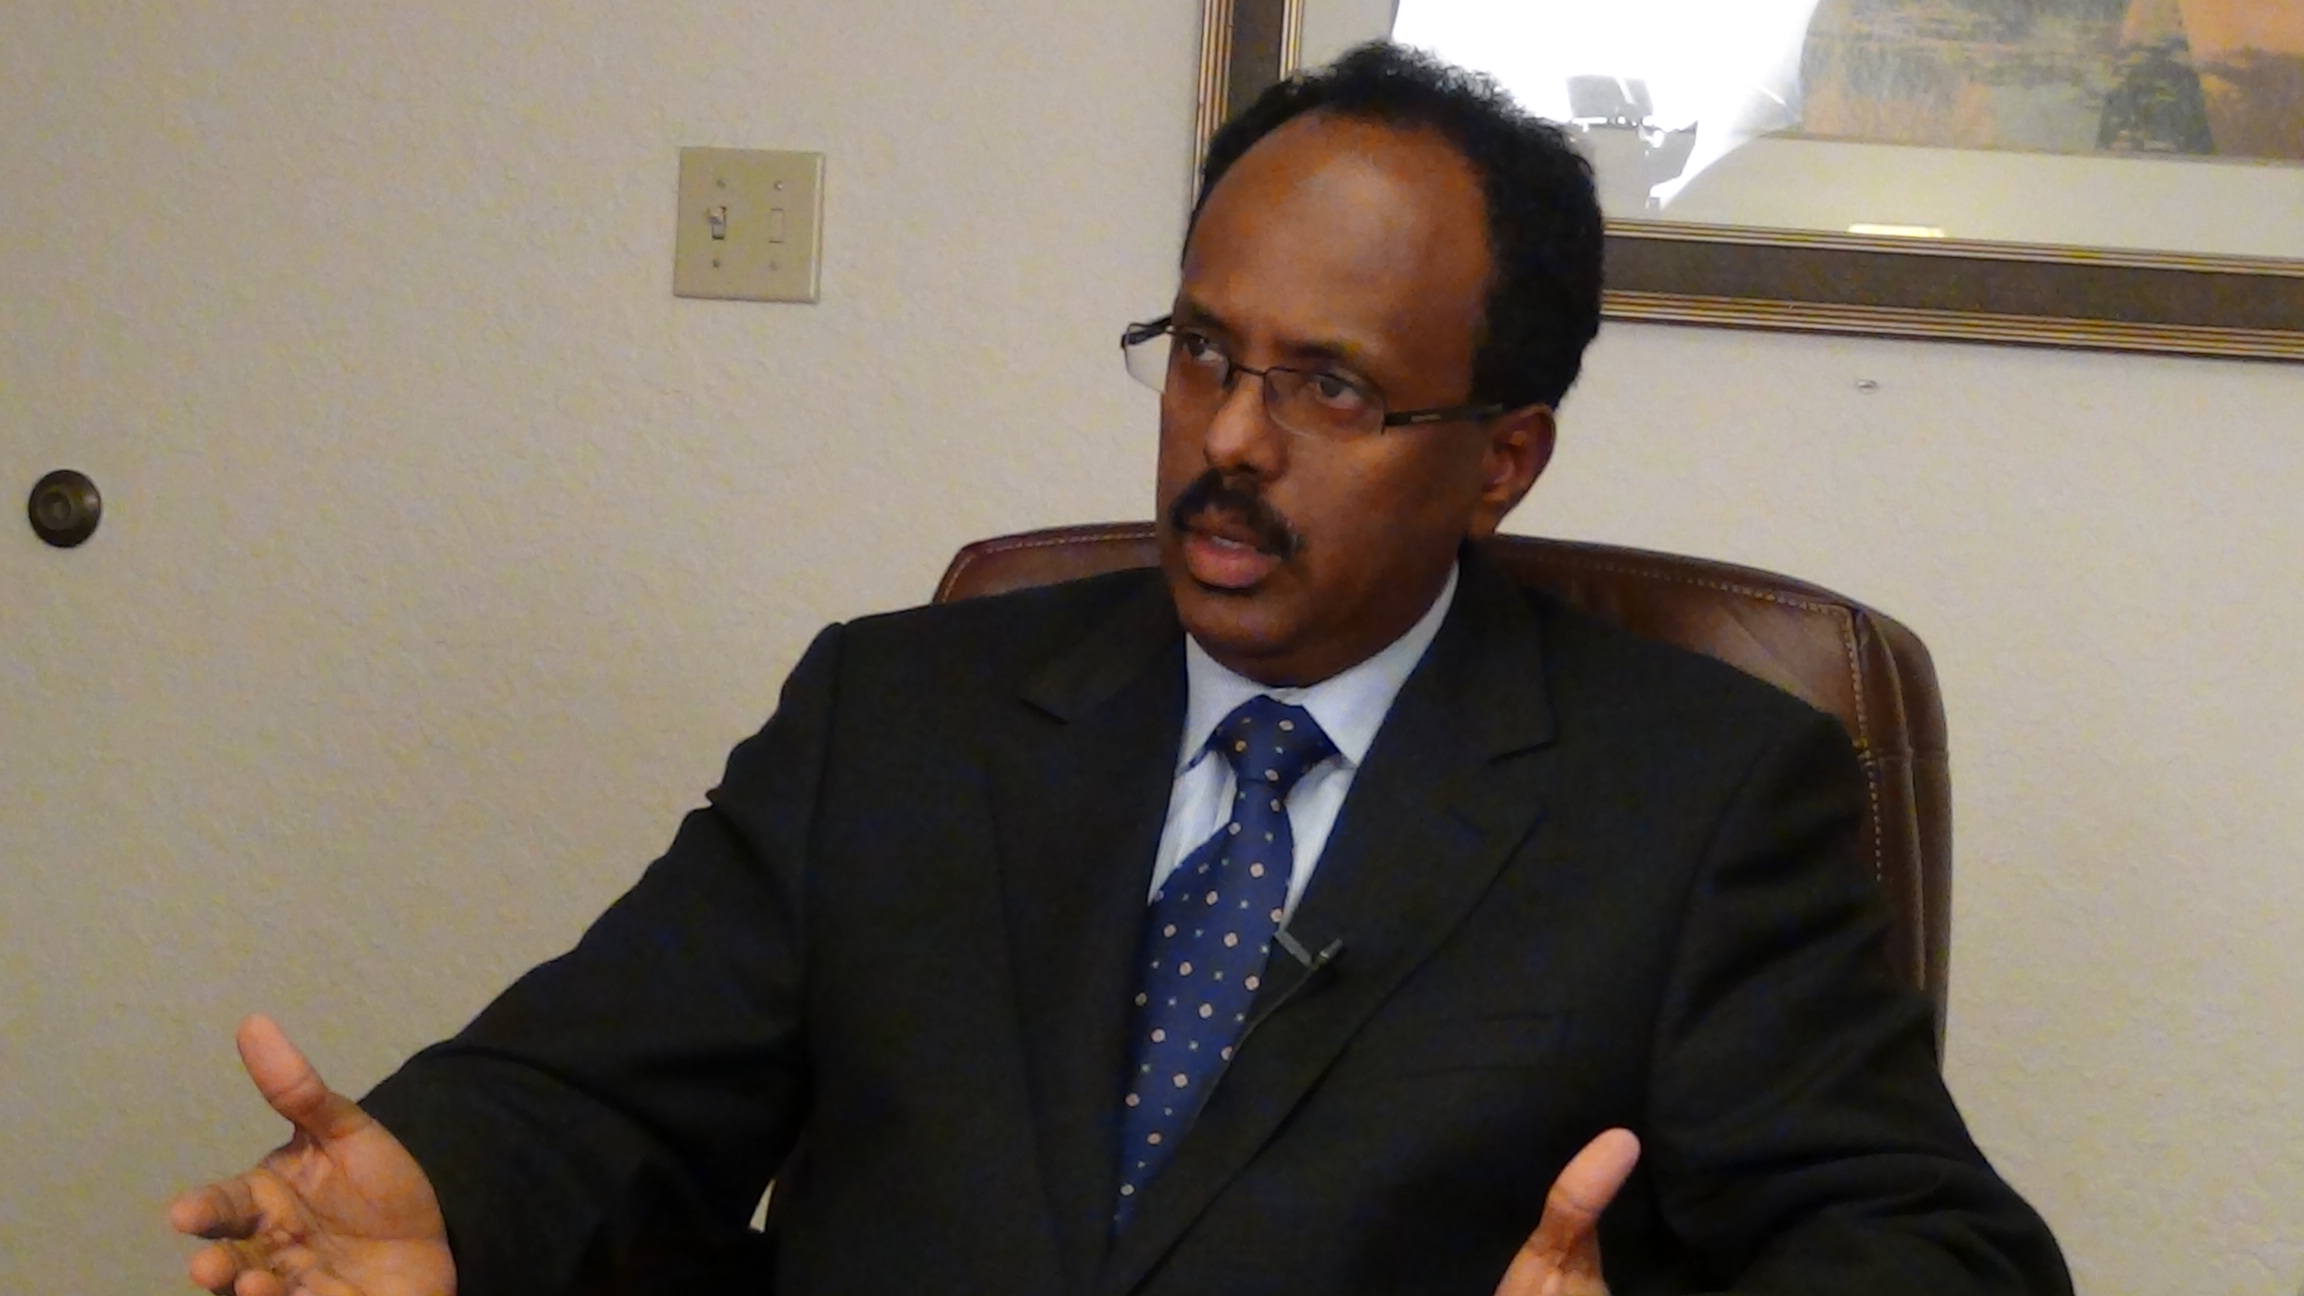 Somalis Celebrate Election of Former U.S. State Worker as President